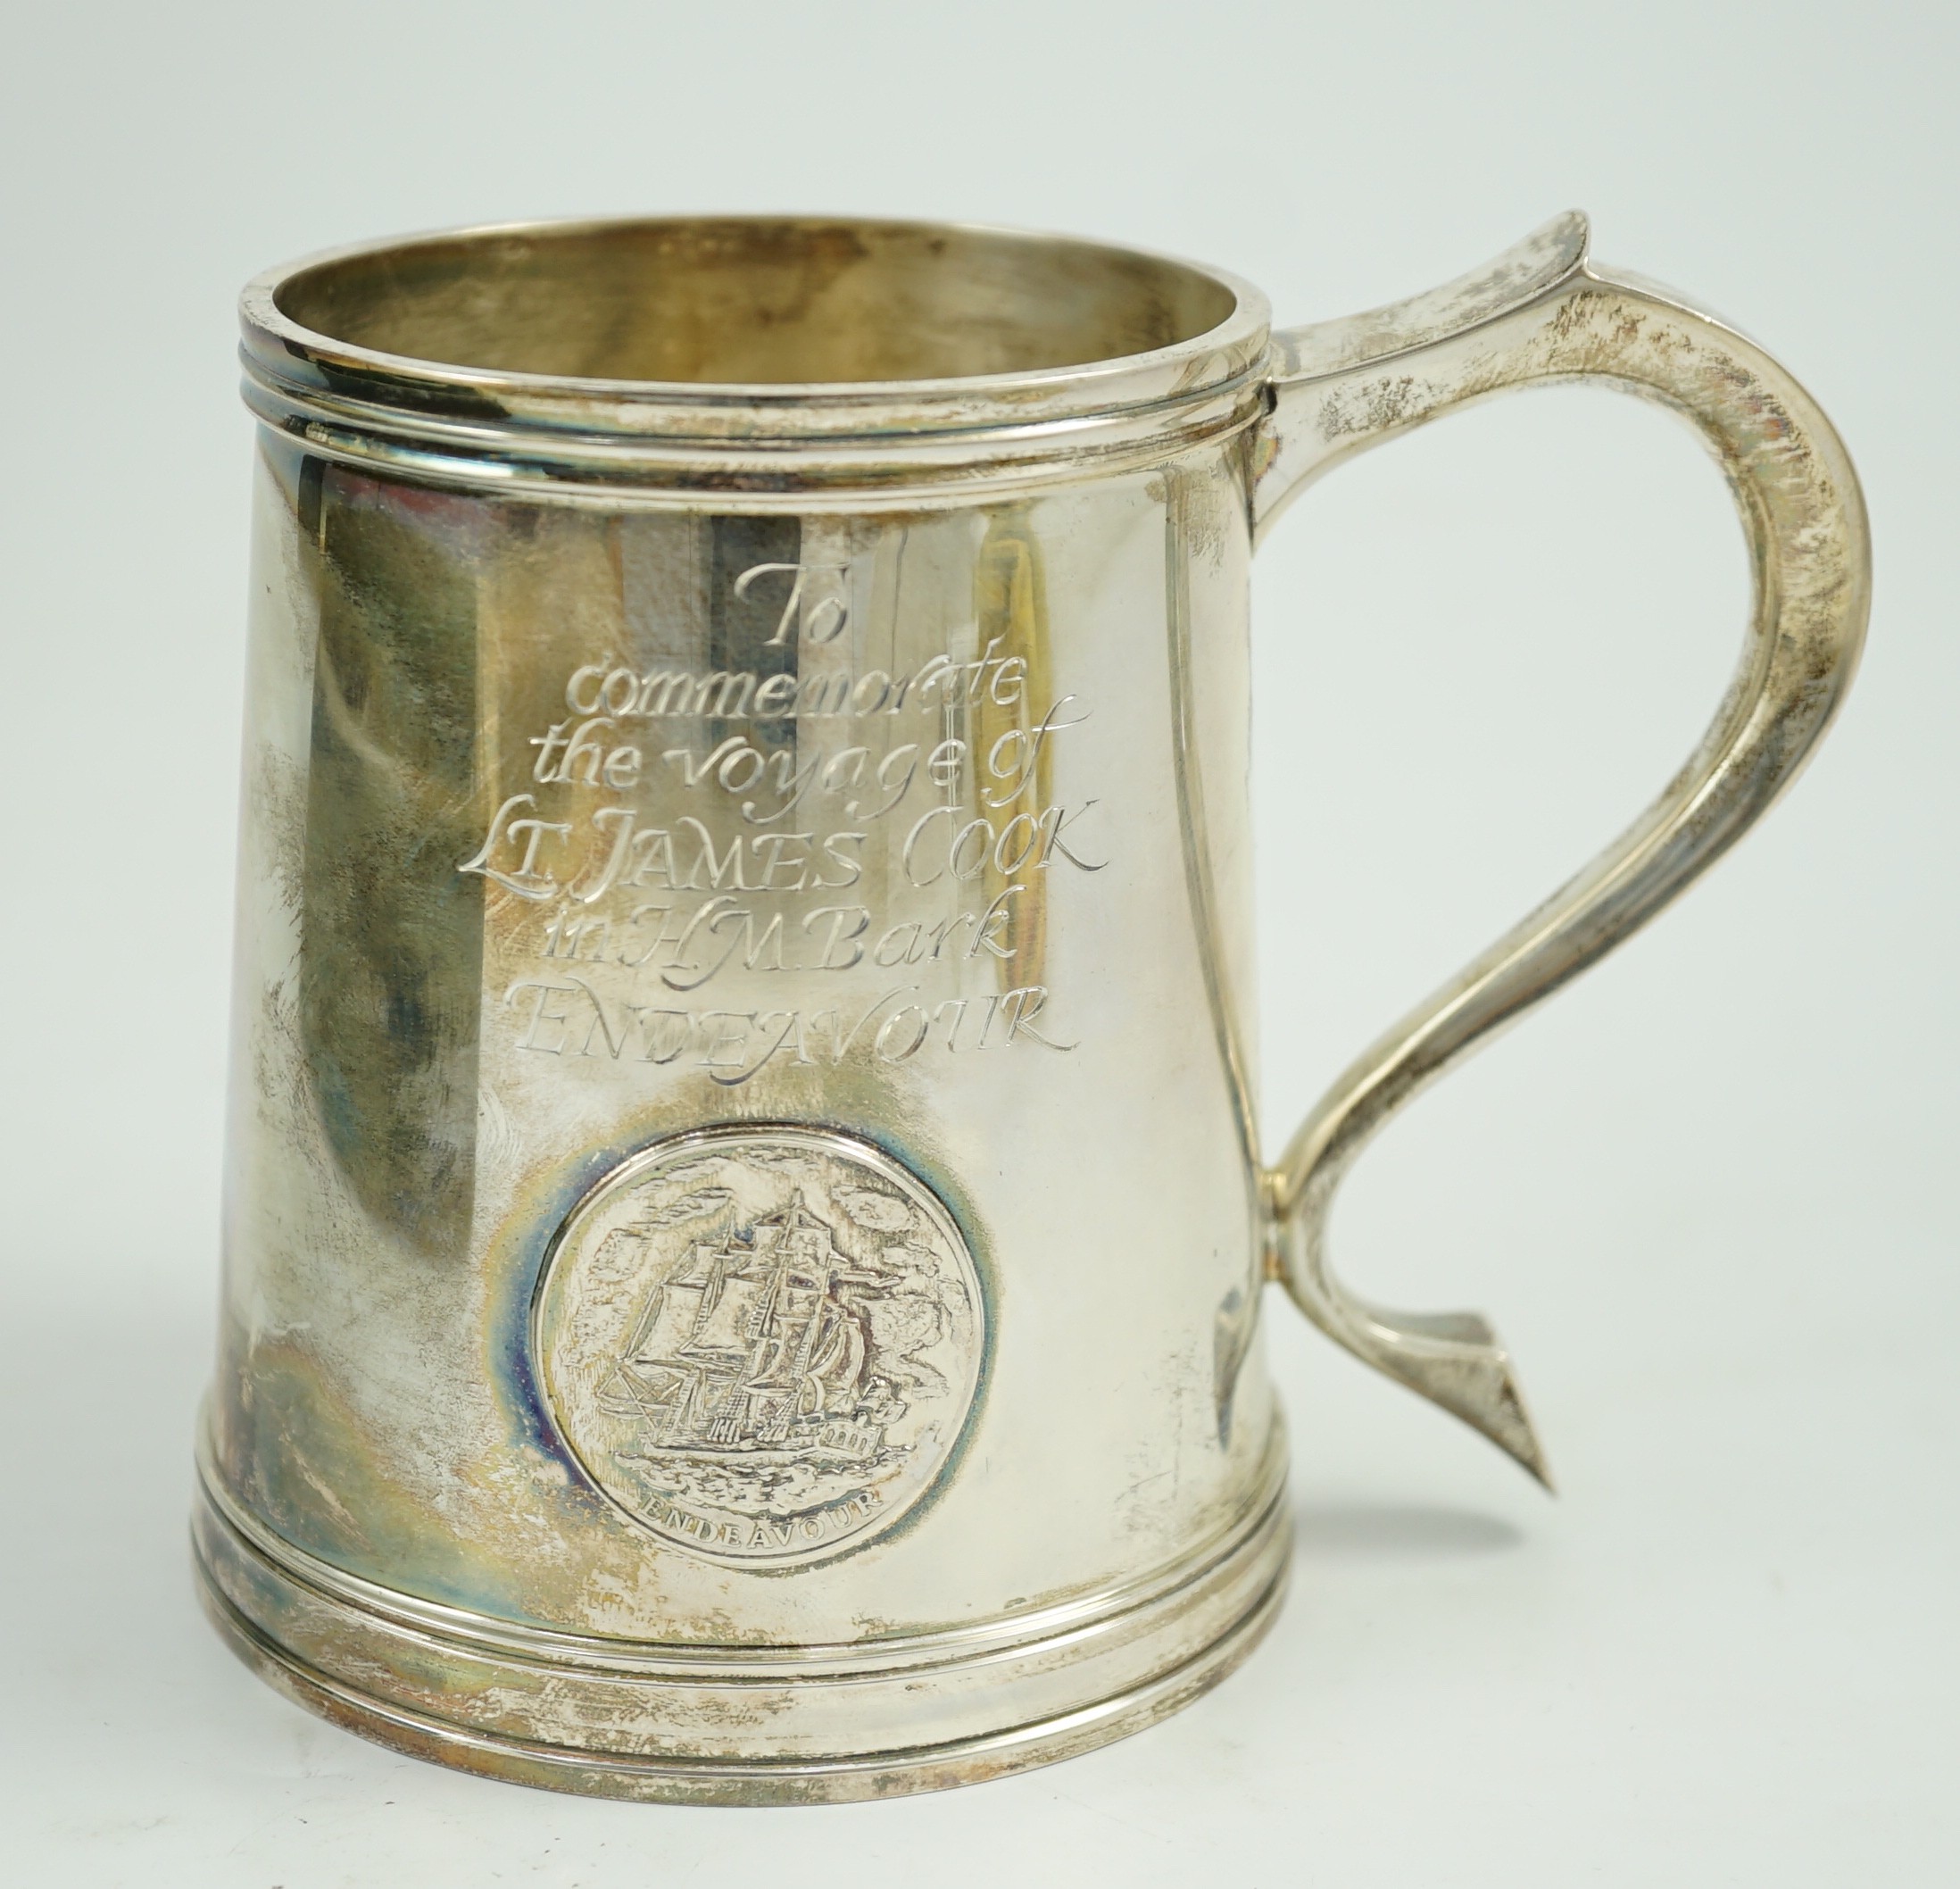 A cased Elizabeth II silver limited edition mug, engraved to commemorate the voyage of Lt. James Cook, in H.M. Bark Endeavour, to Australia